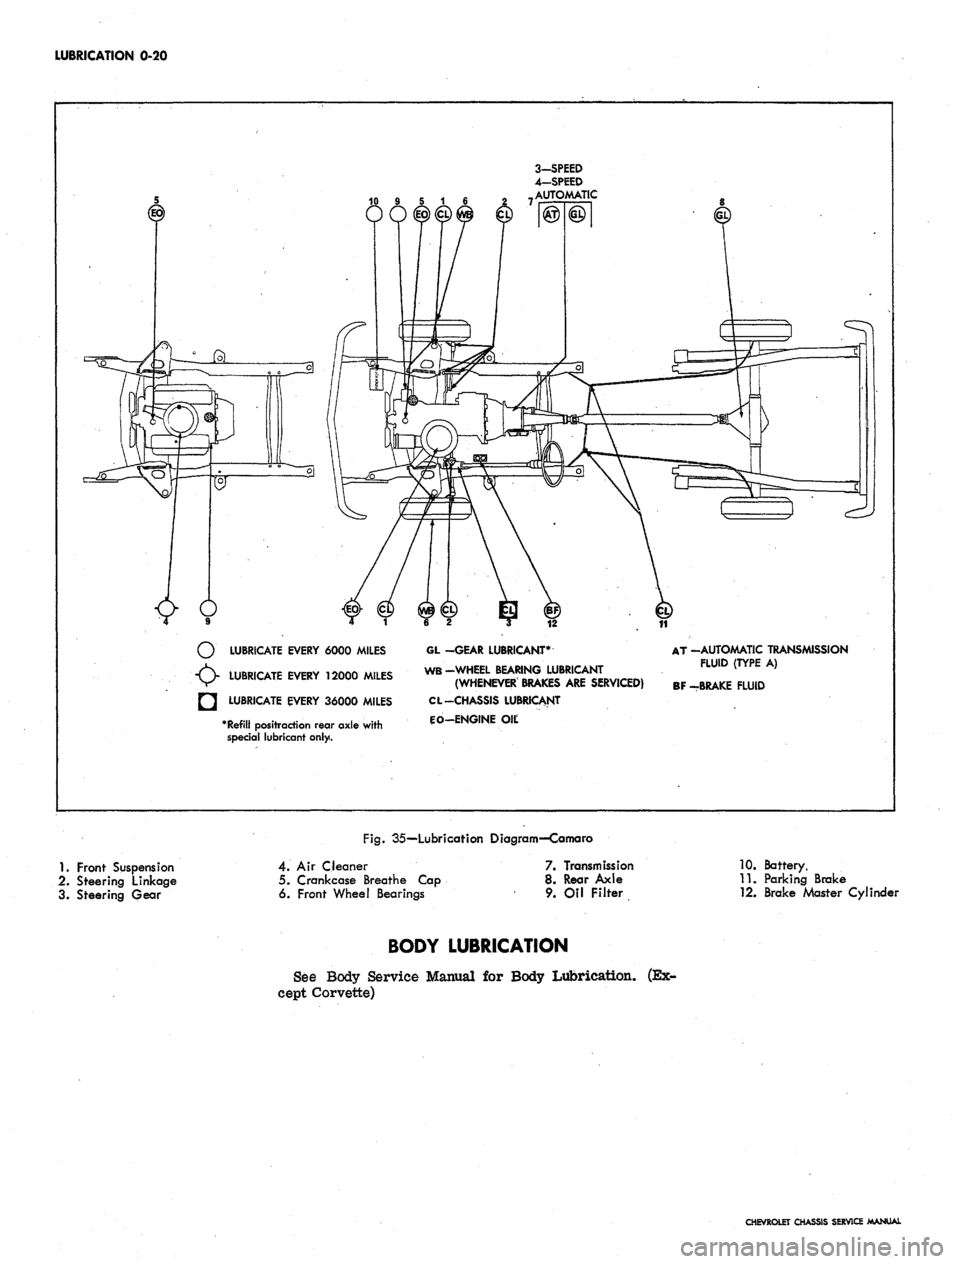 CHEVROLET CAMARO 1967 1.G Chassis Workshop Manual 
LUBRICATION 0-20

3-SPEED

4—SPEED

AUTOMATIC

LUBRICATE EVERY 6000 MILES

LUBRICATE EVERY 12000 MILES

LUBRICATE EVERY 36000 MILES

*
 Refill
 positraction rear axle with

special lubricant only. 